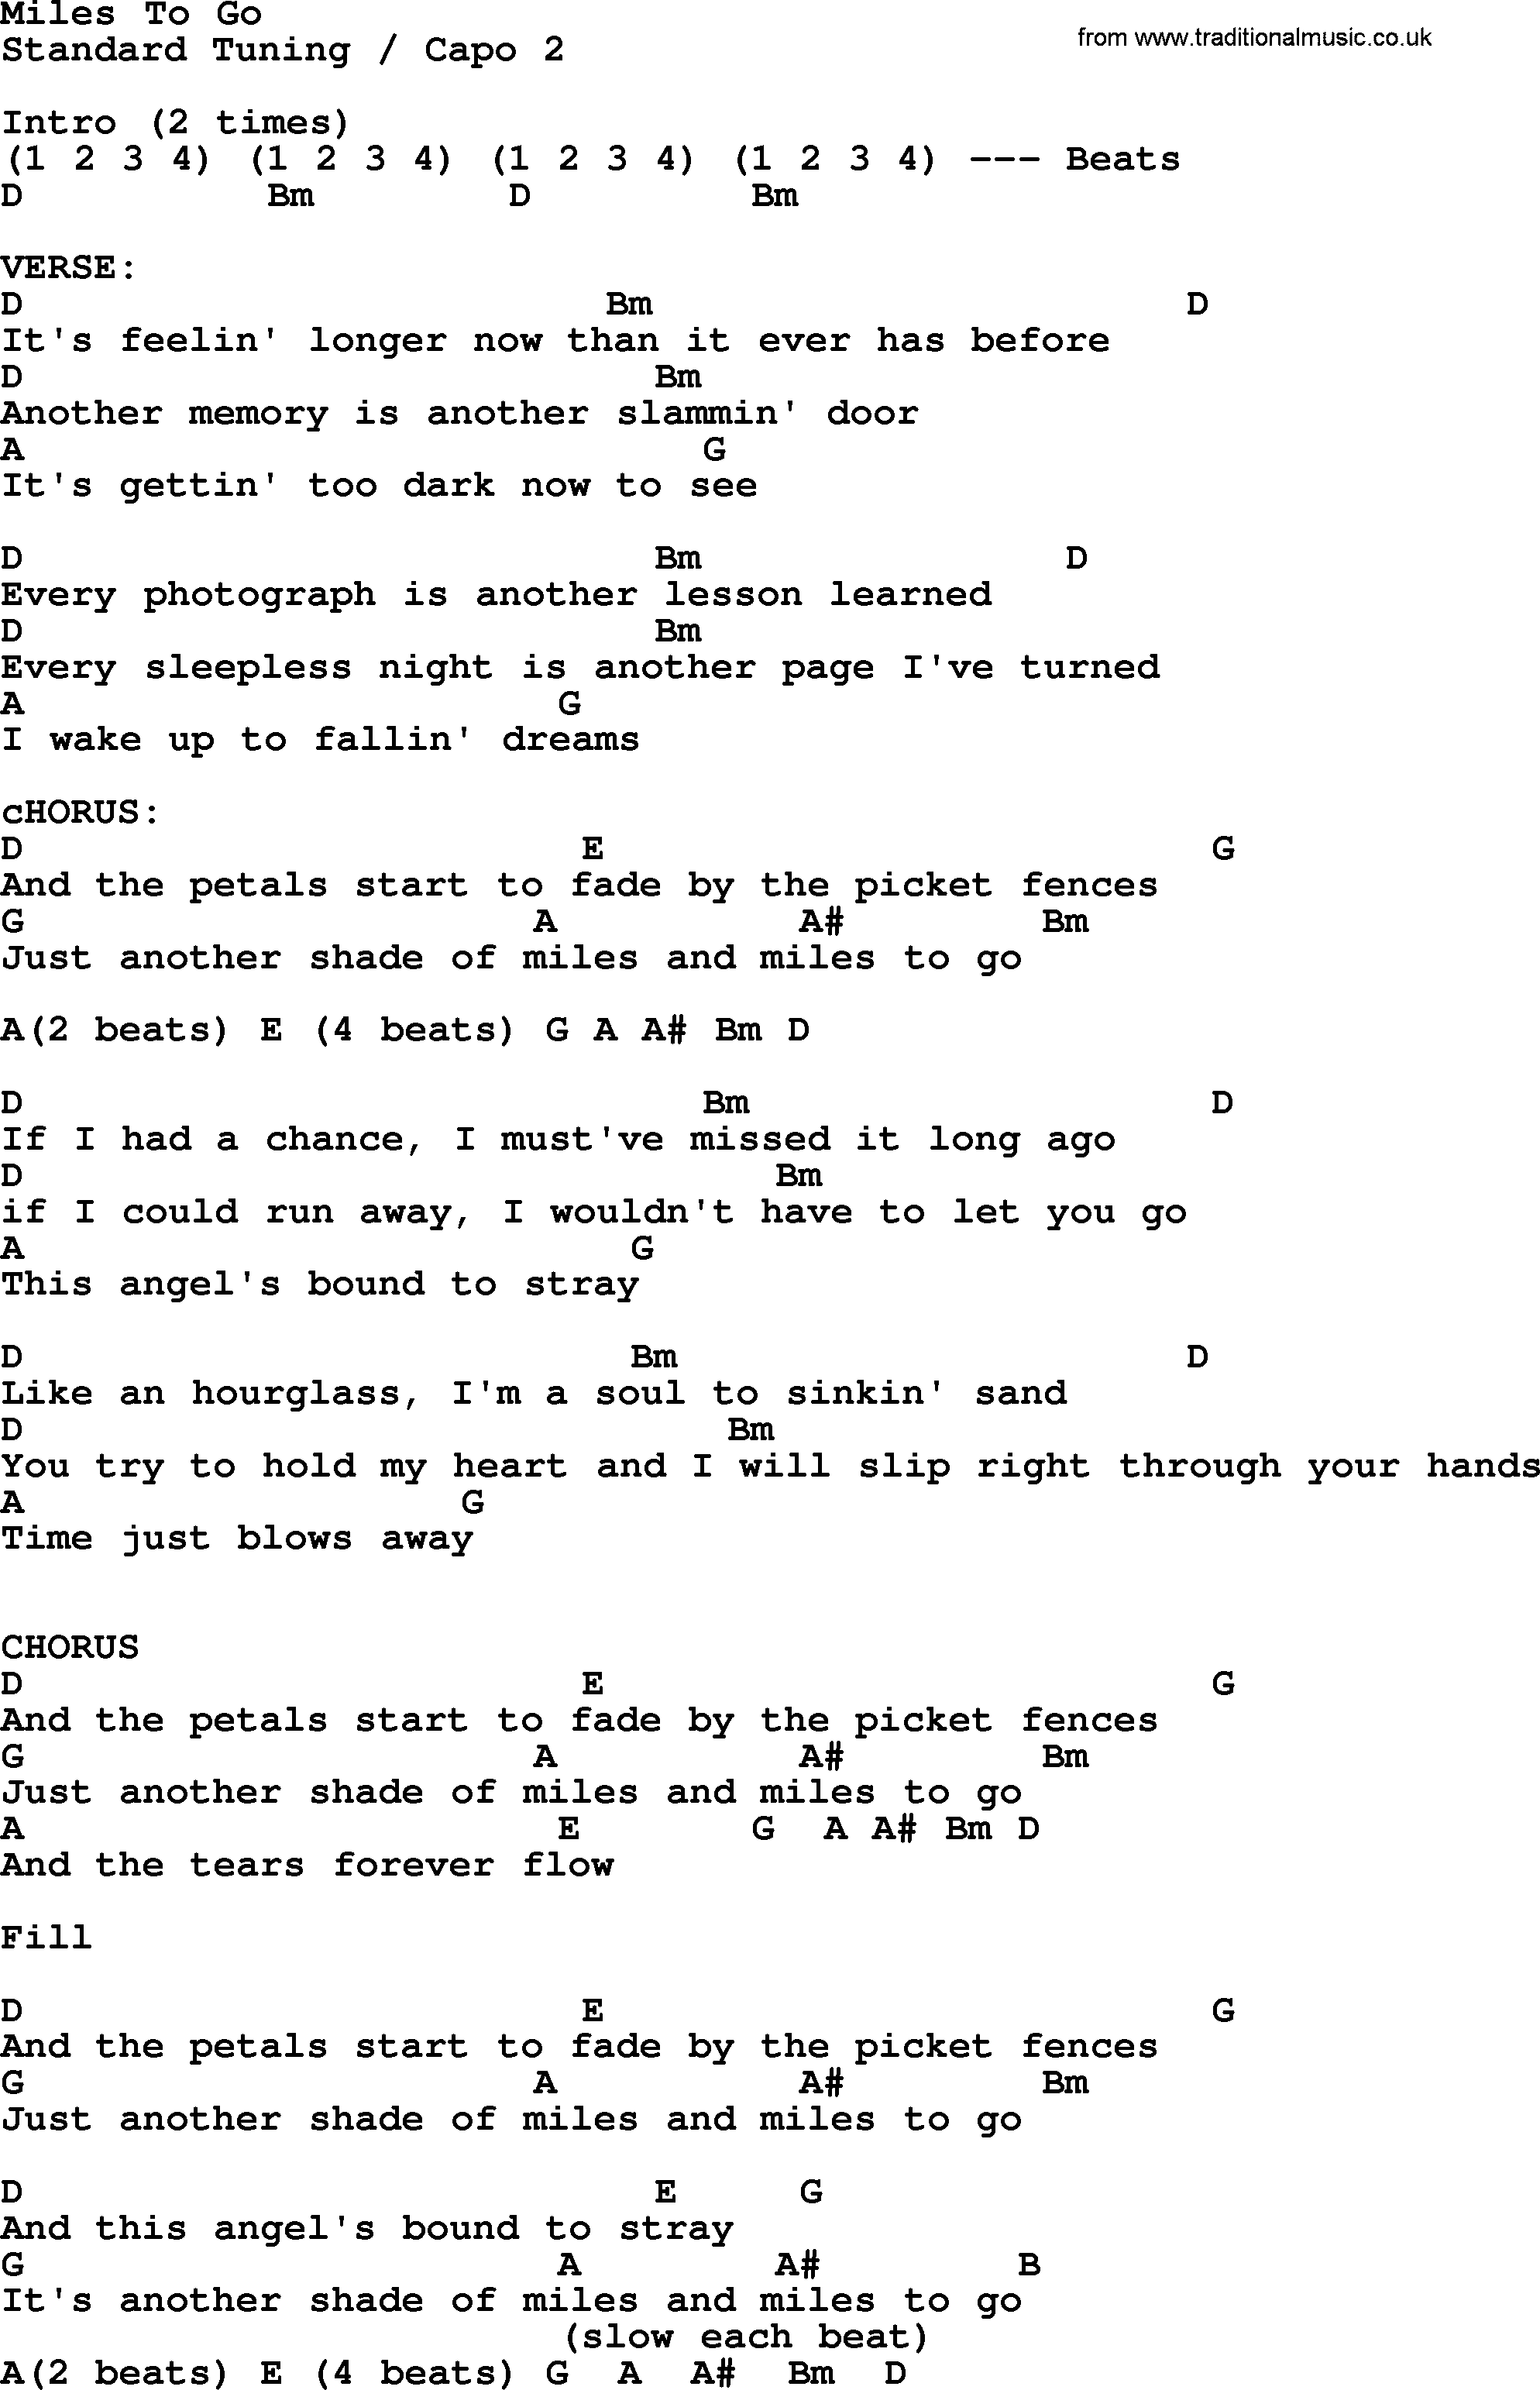 Bluegrass song: Miles To Go, lyrics and chords